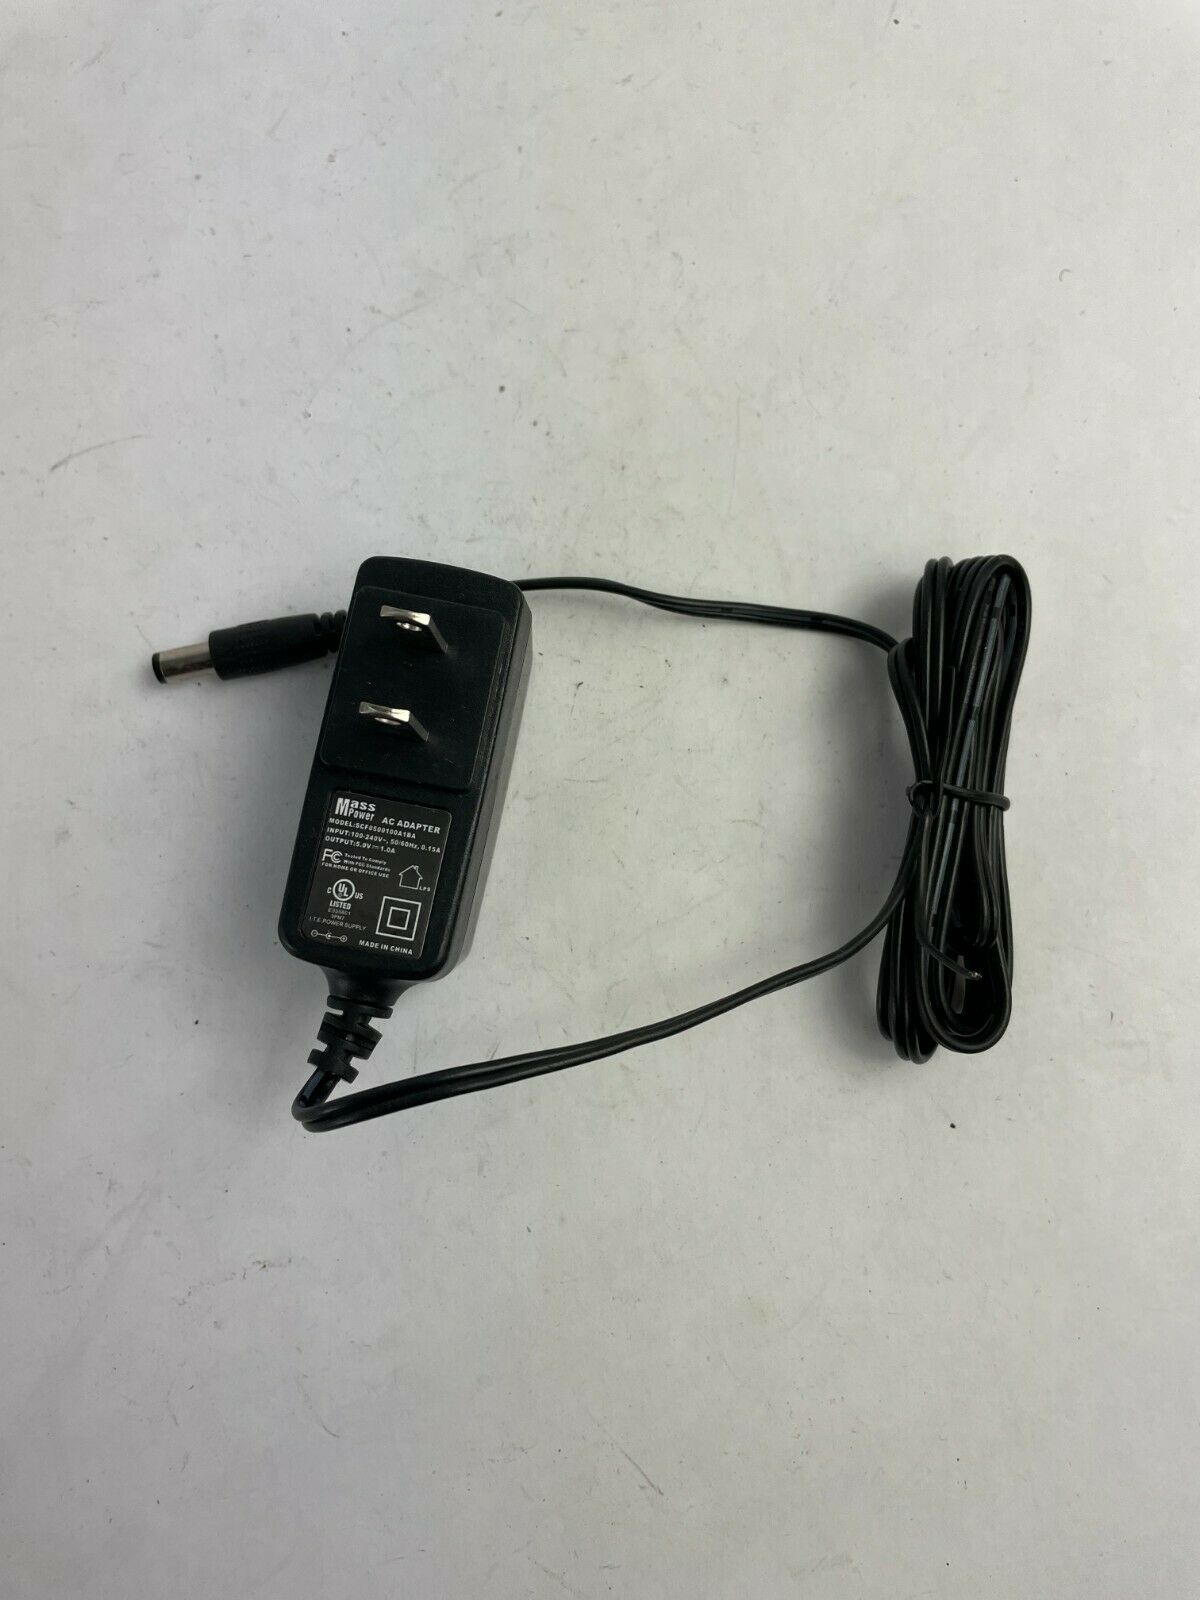 Genuine Mass Power SCF0500100A1BA Output 5.0 V 1.0 A Power Supply Adapter A77 Compatible Brand: For Mass Power Type: